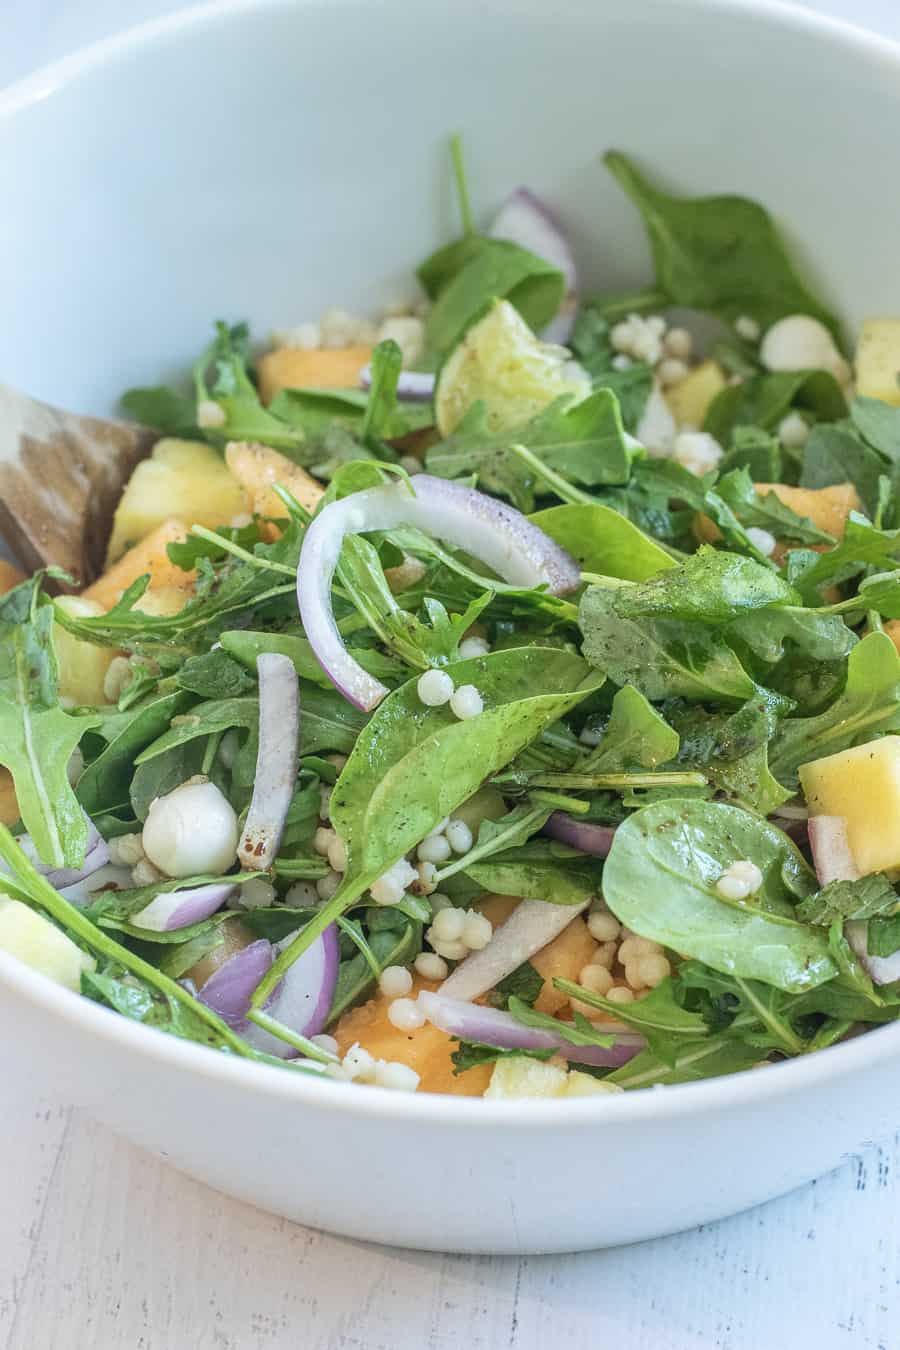 Cantaloupe salad served atop arugula and greens in white serving bowl